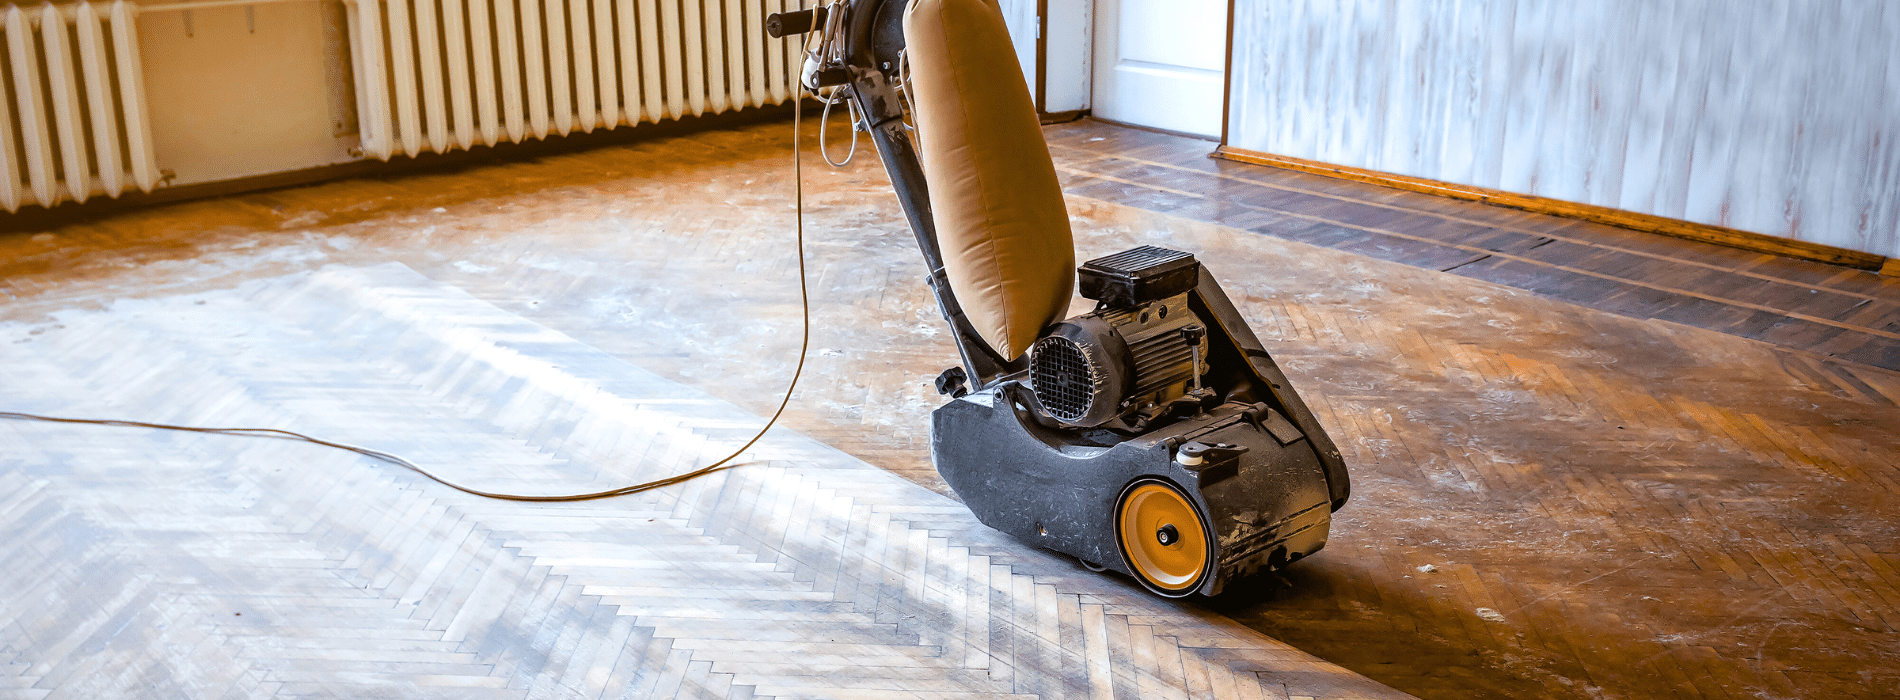 In Gravesend, DA13 ,Mr Sander® skillfully sanding a herringbone floor with a powerful Effect 2200 Voltage 230 Frequency 50 Bona belt sander. The dust extraction system with a HEPA filter ensures a clean and efficient result.